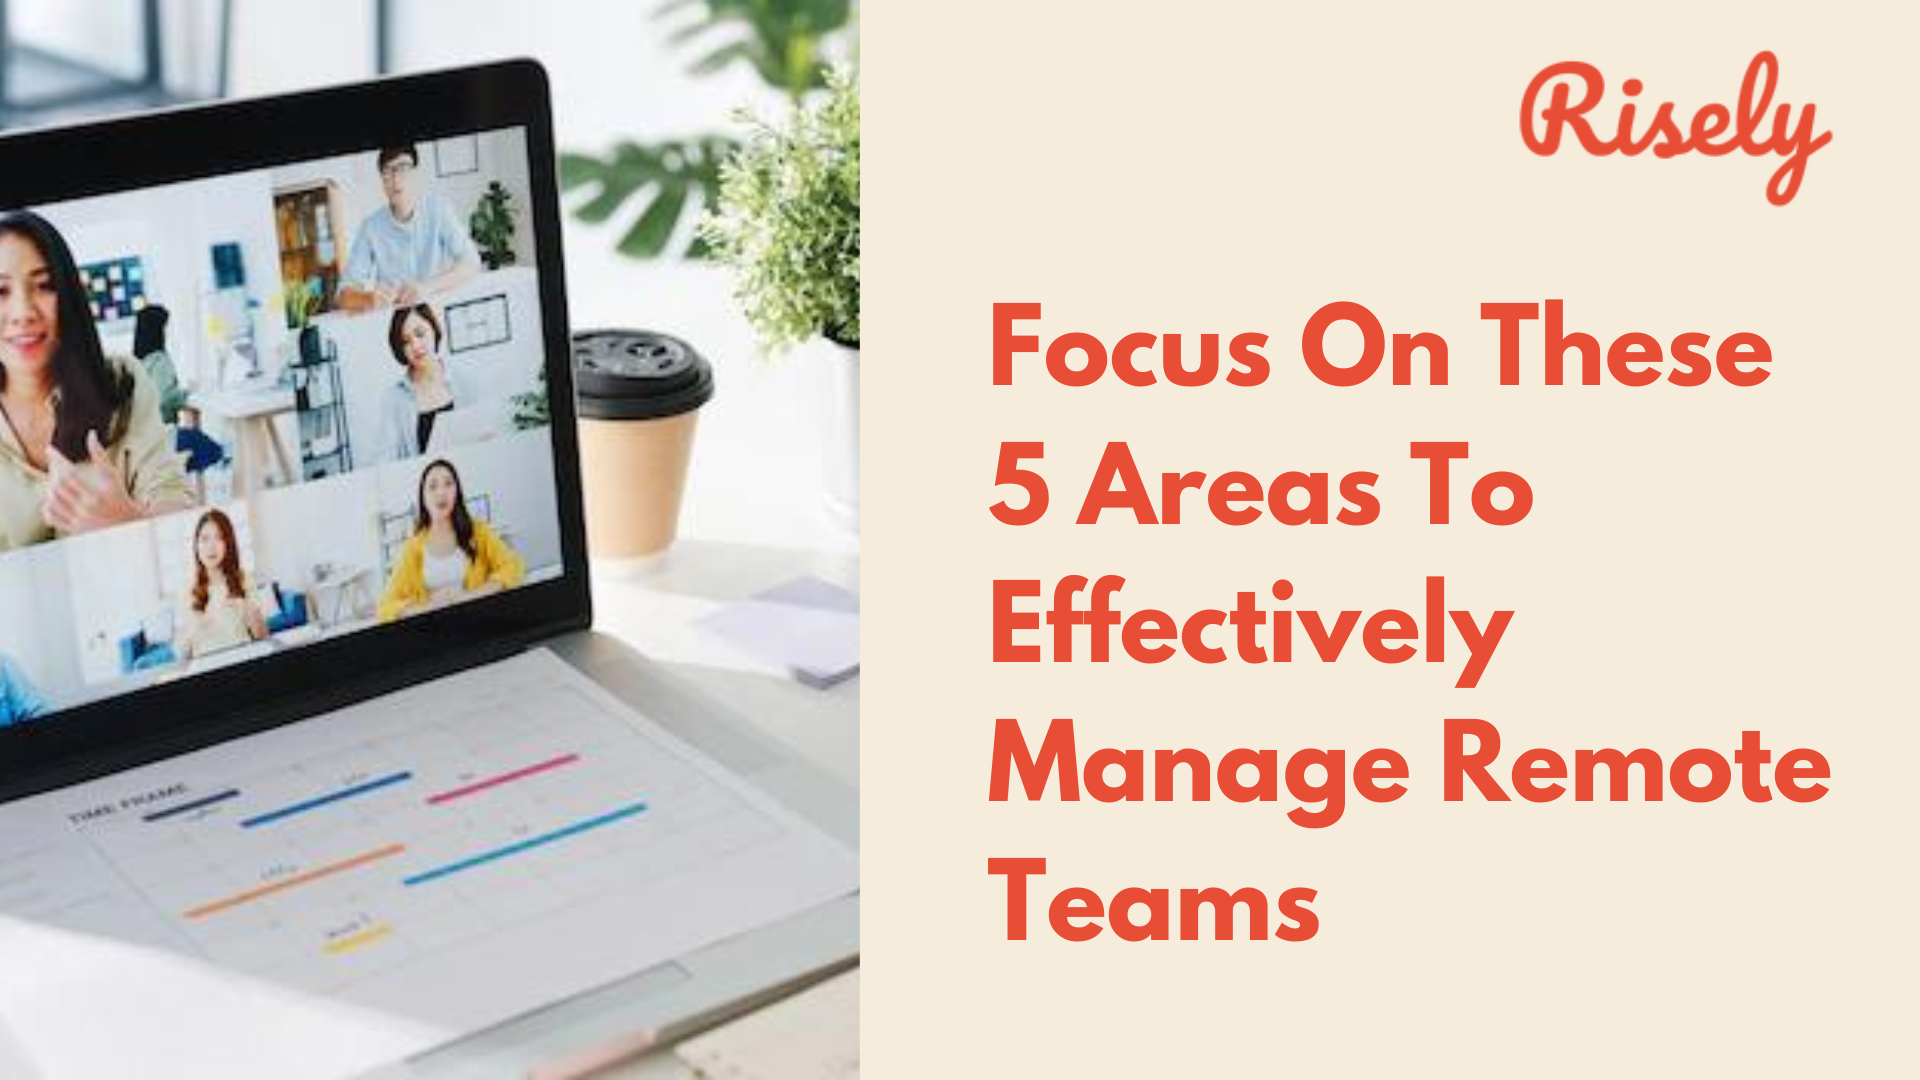 Focus On These 5 Areas To Effectively Manage Remote Teams